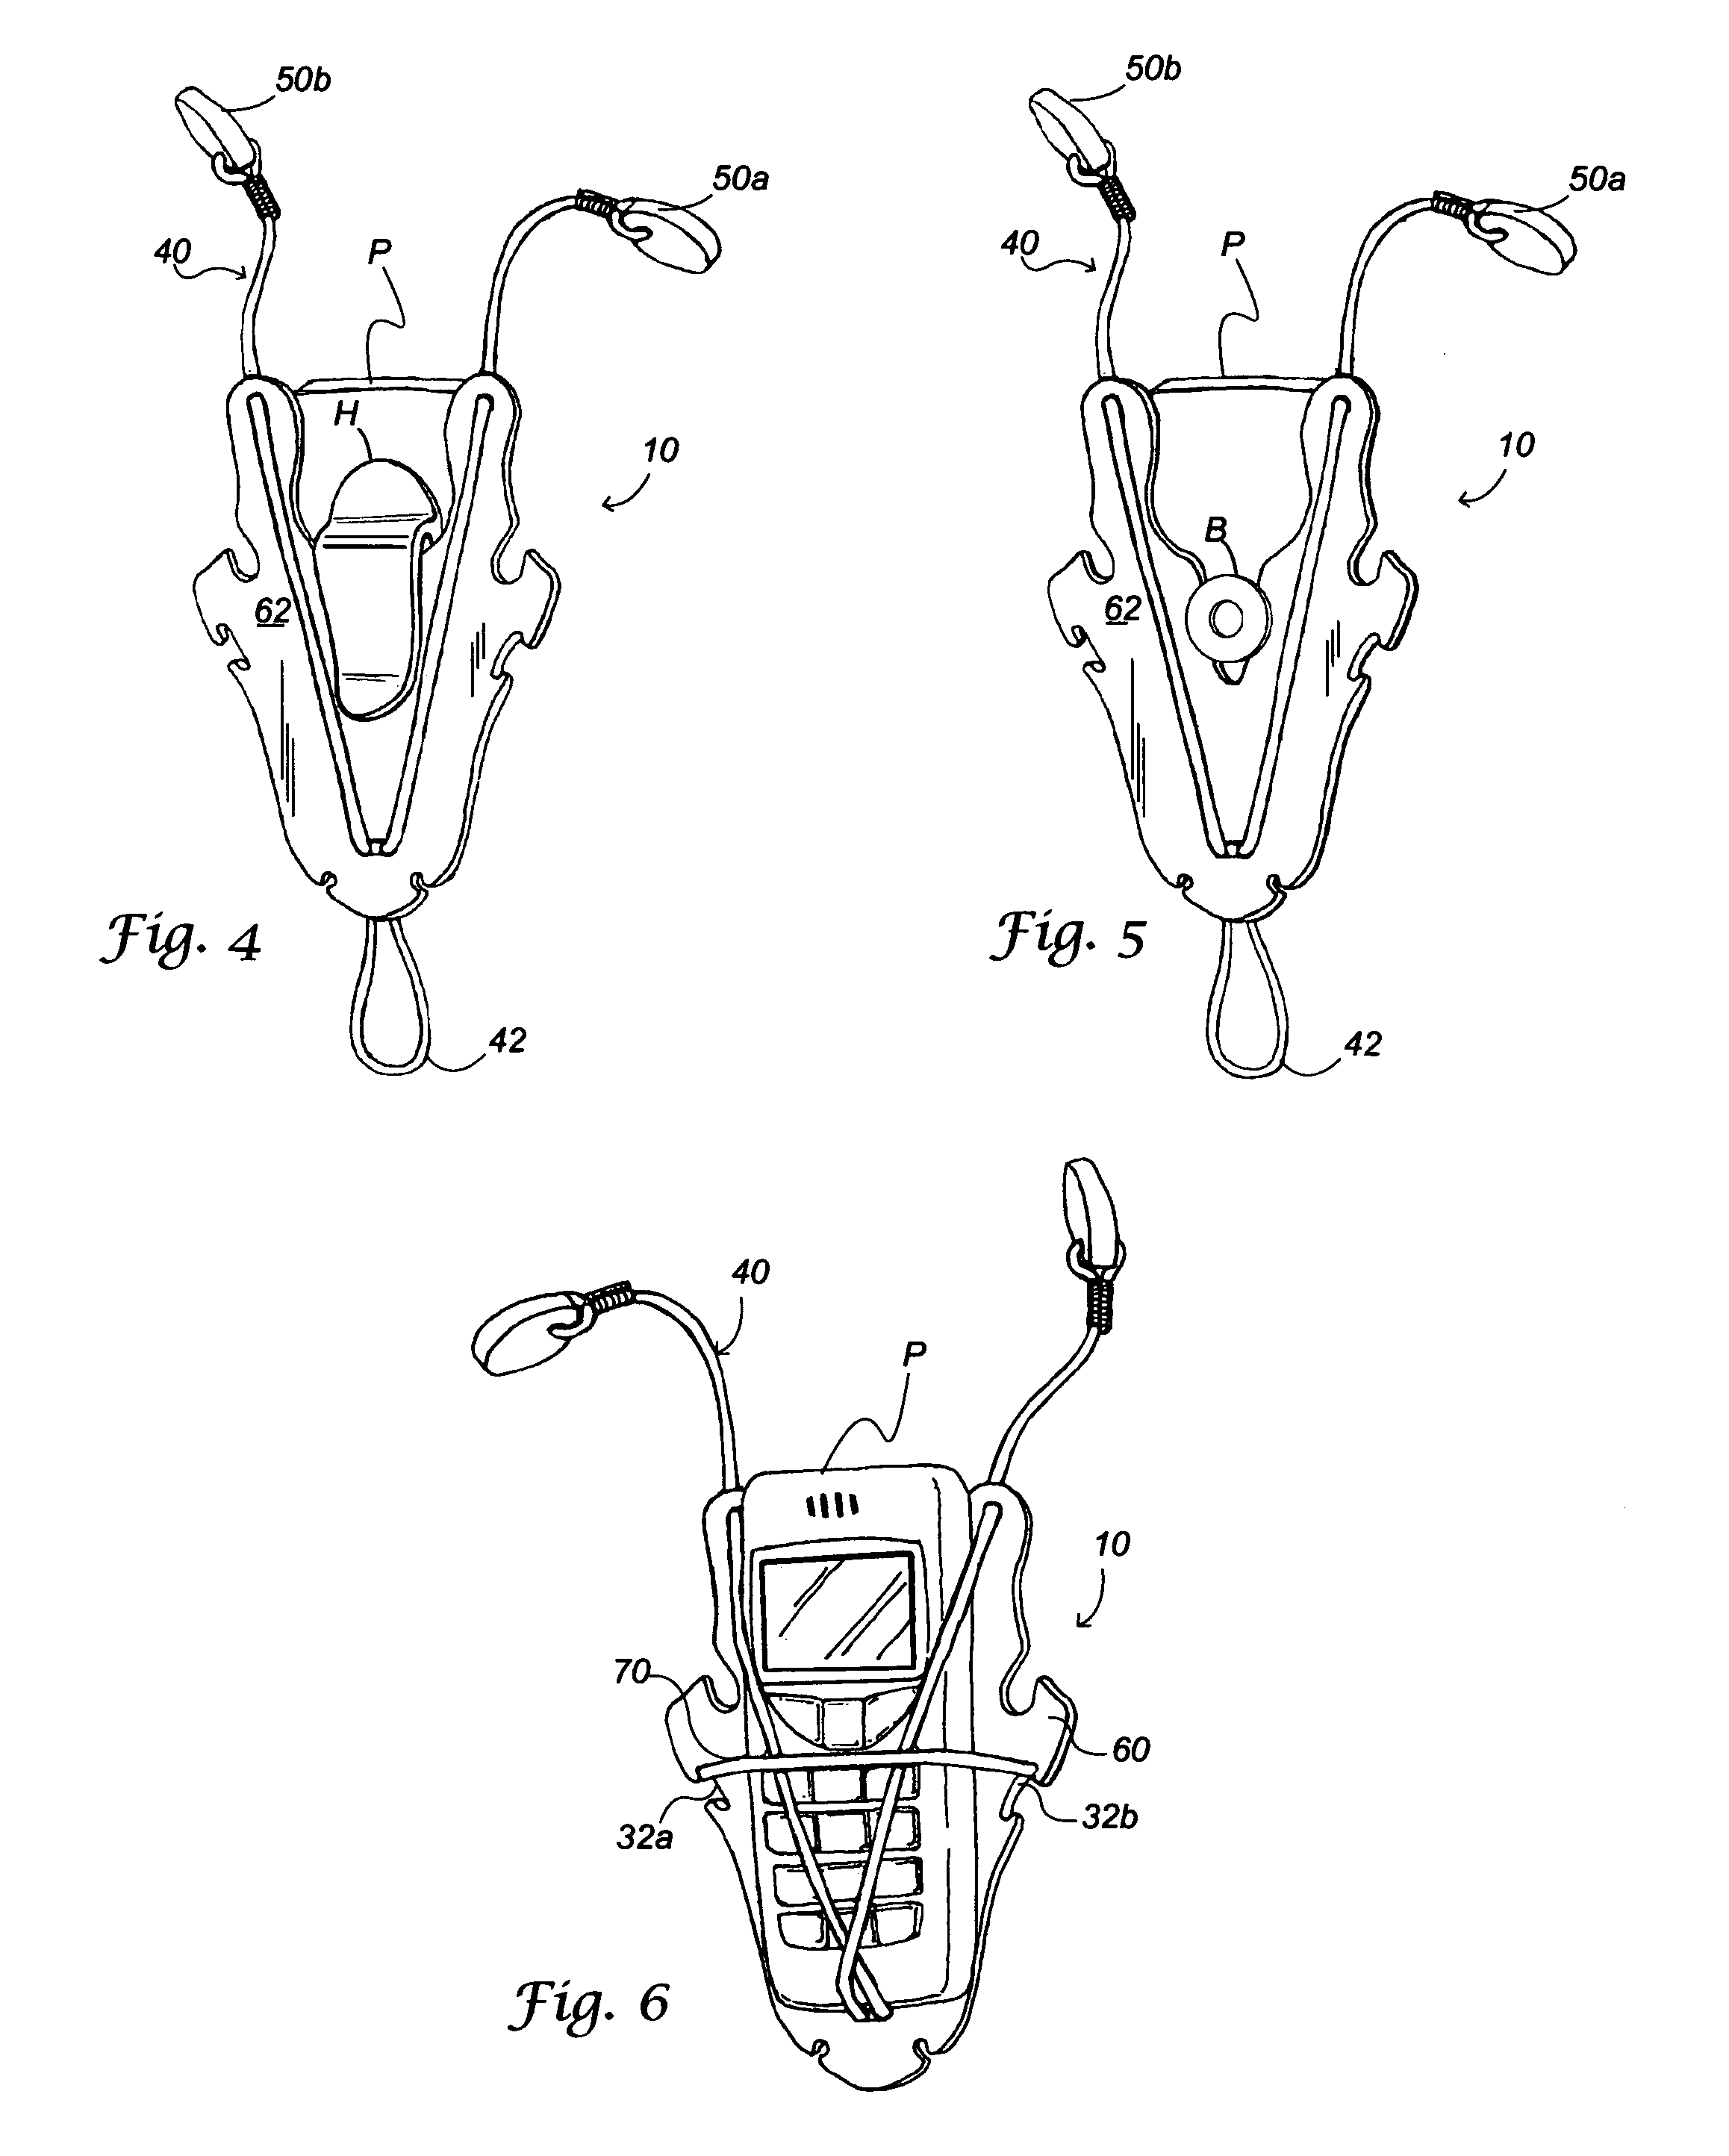 Holder for an electronic device